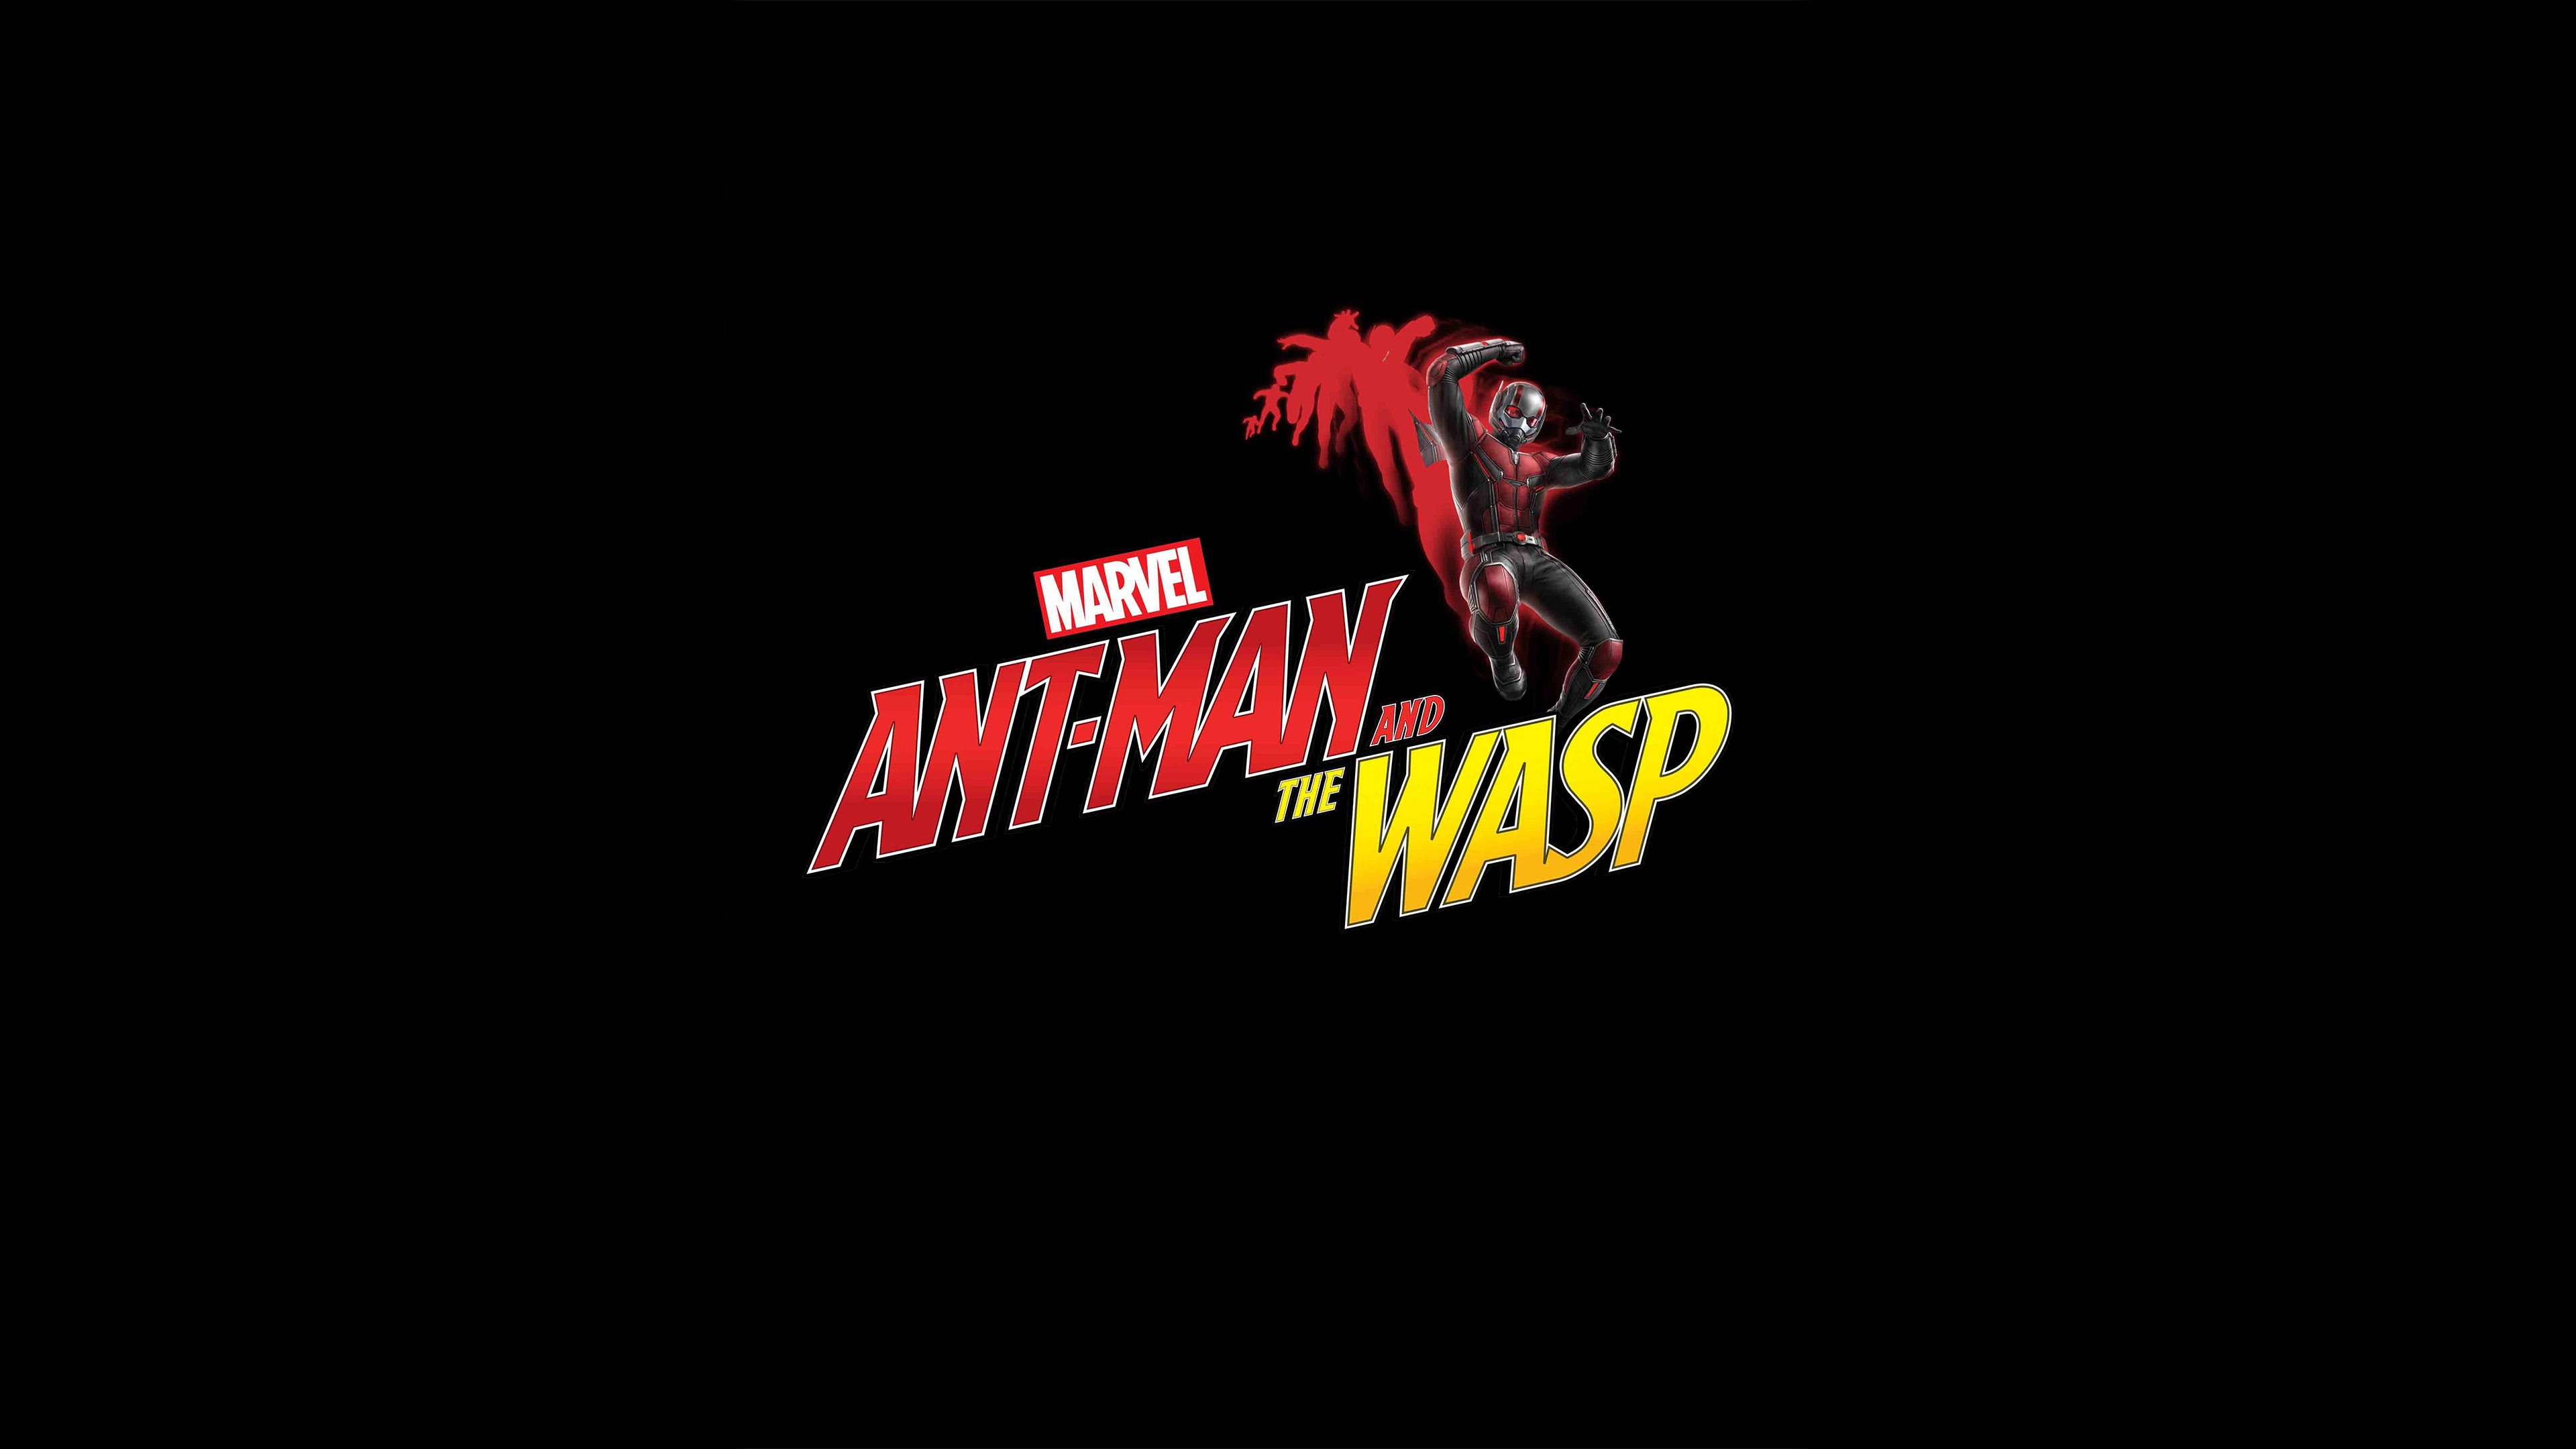 Ant-Man and the Wasp 4K Wallpapers